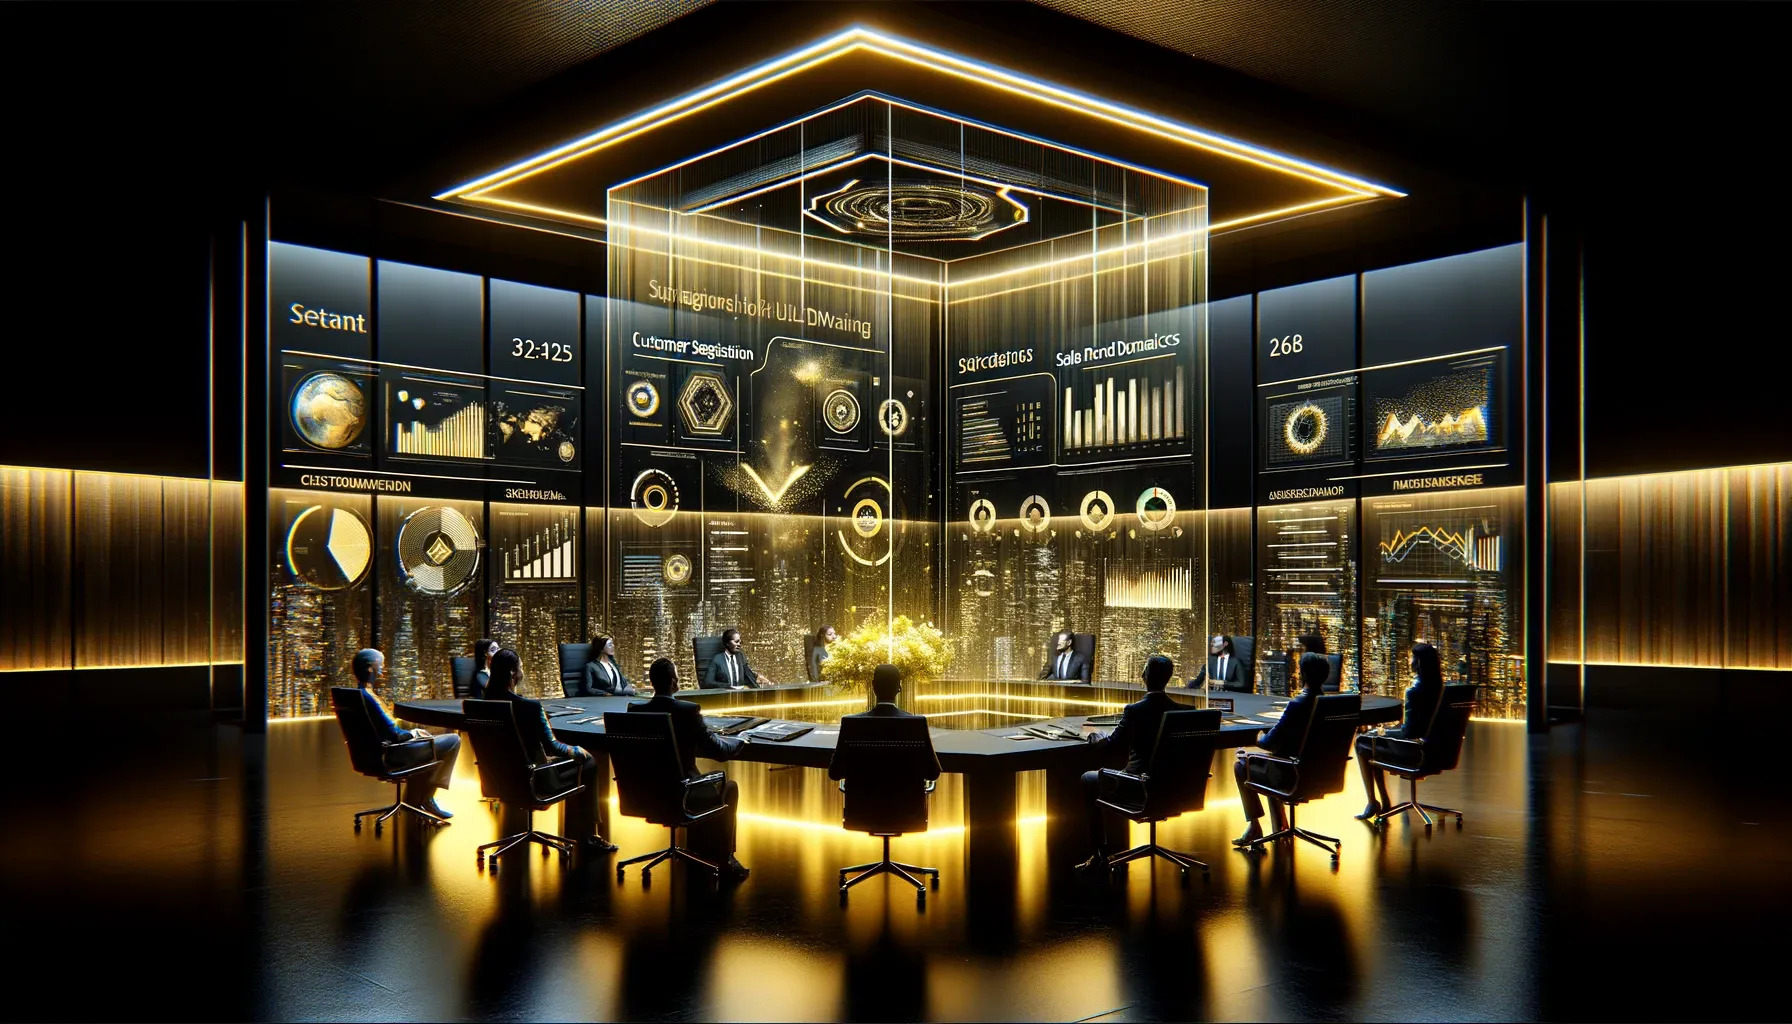 DALL-E-2024-06-02-23.52.07---Imagine-a-futuristic-boardroom-with-holographic-displays-showing-insights-from-customer-segmentation--sales-trends--and-product-dynamics.-The-room-is